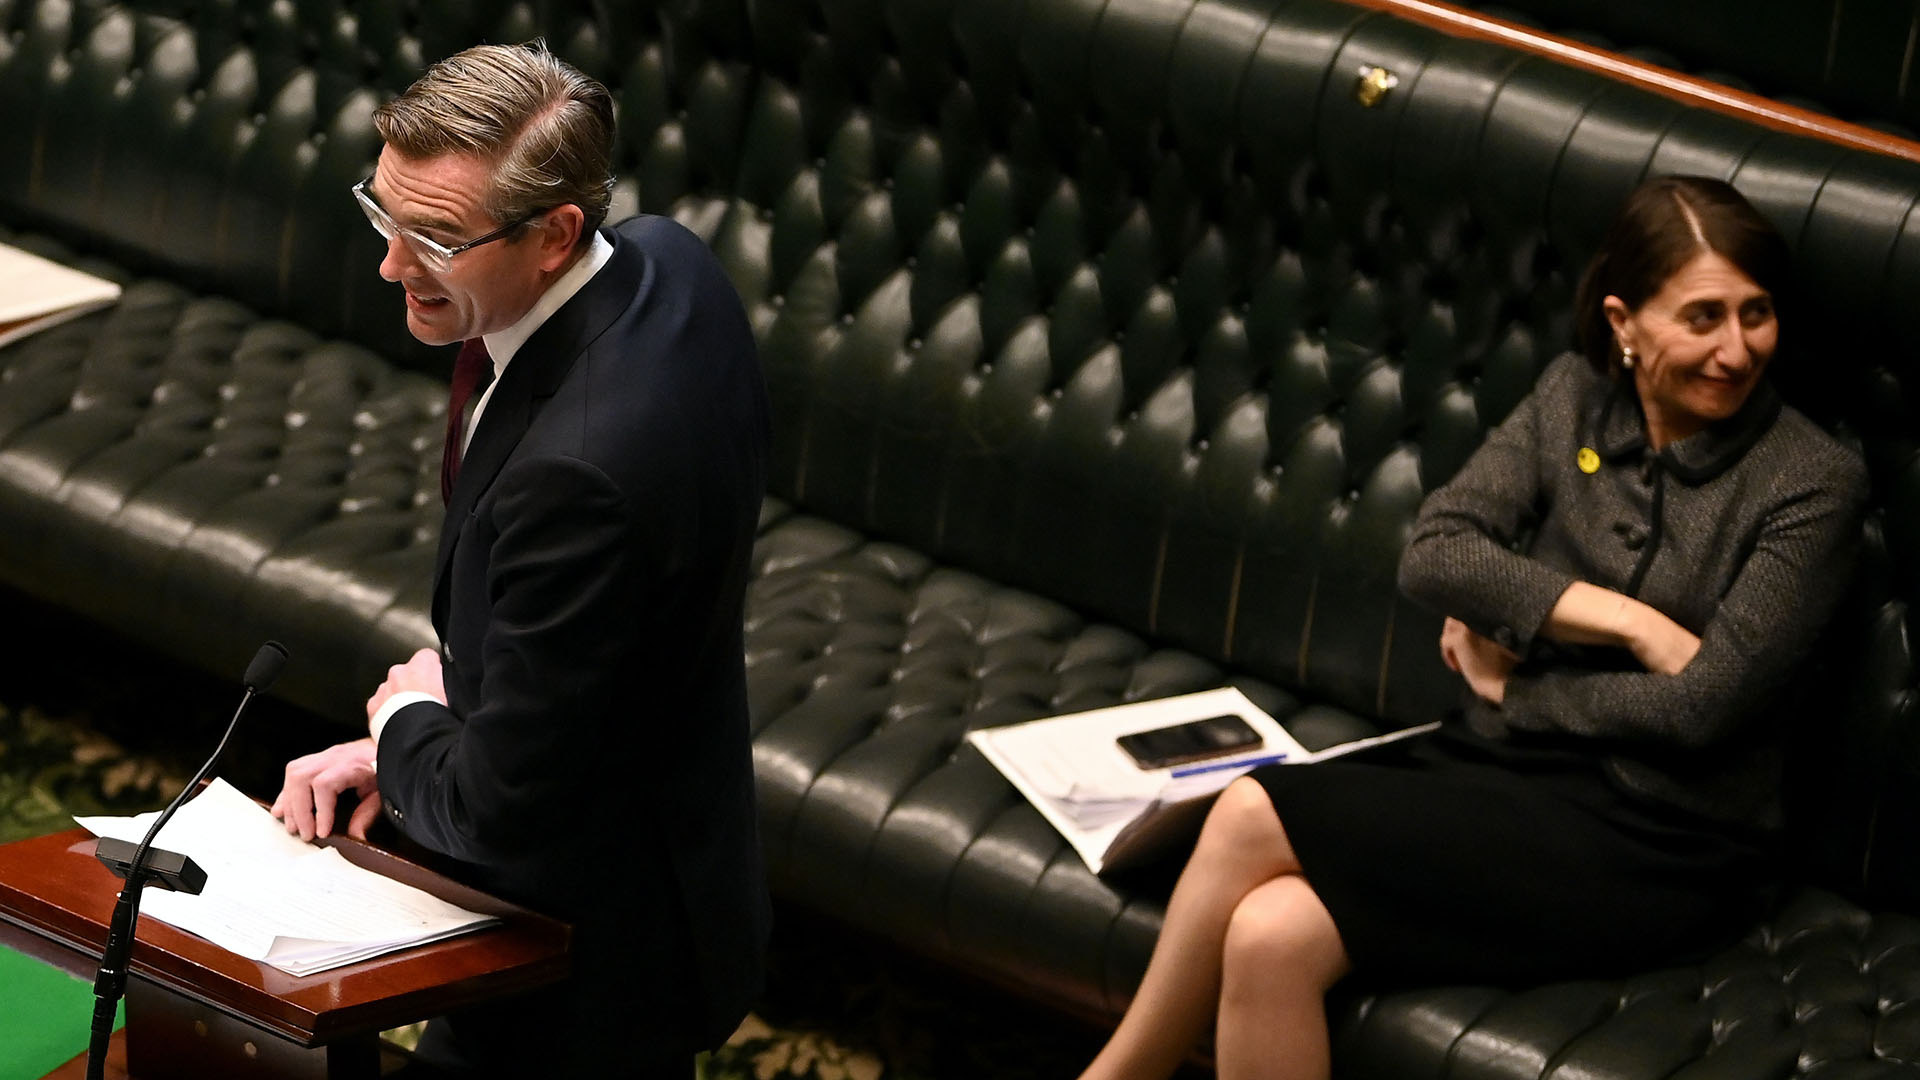 Dominic Perrotet in the NSW Parliament with Gladys Berijiklian. Dan Himbrechts/AAP